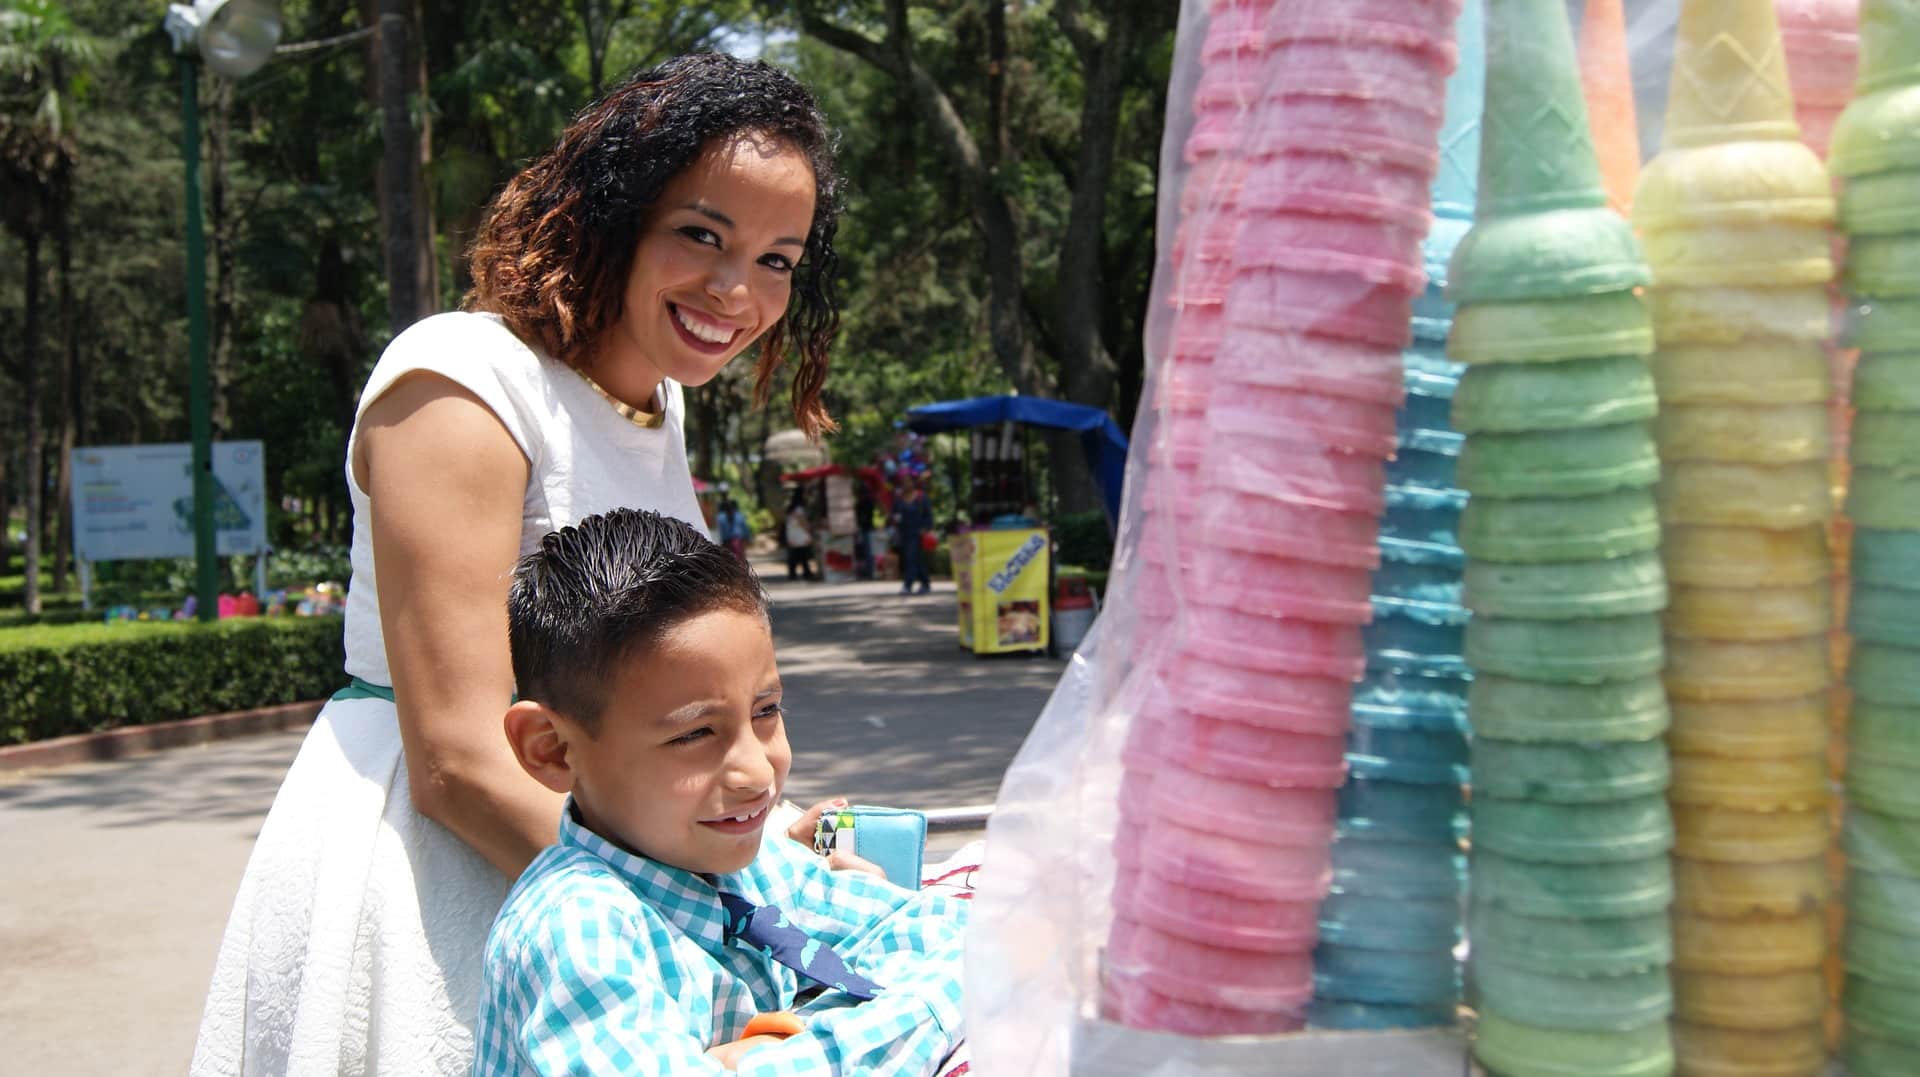 send money to elektra to families like this one in mexico in the park with ice cream cones